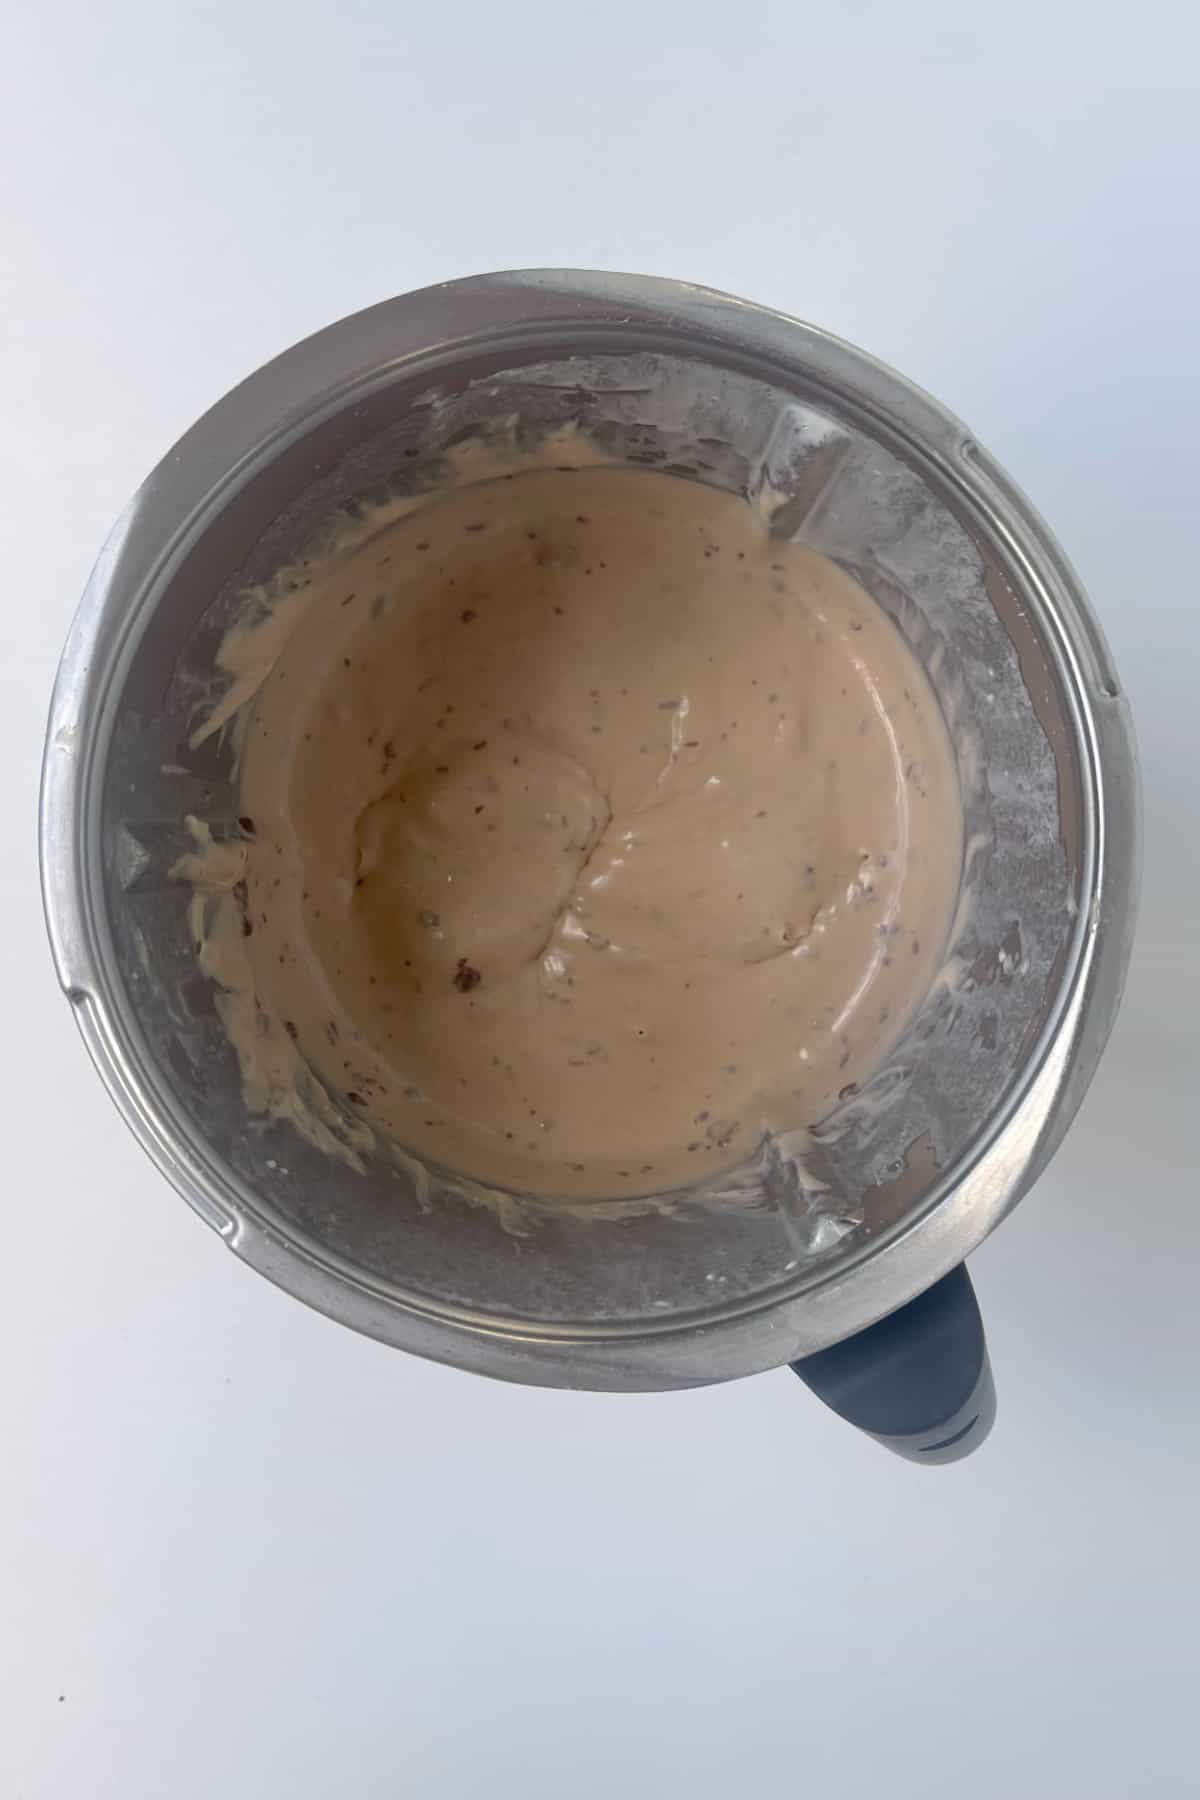 No bake mars bar cheesecake filling in a thermomix bowl.